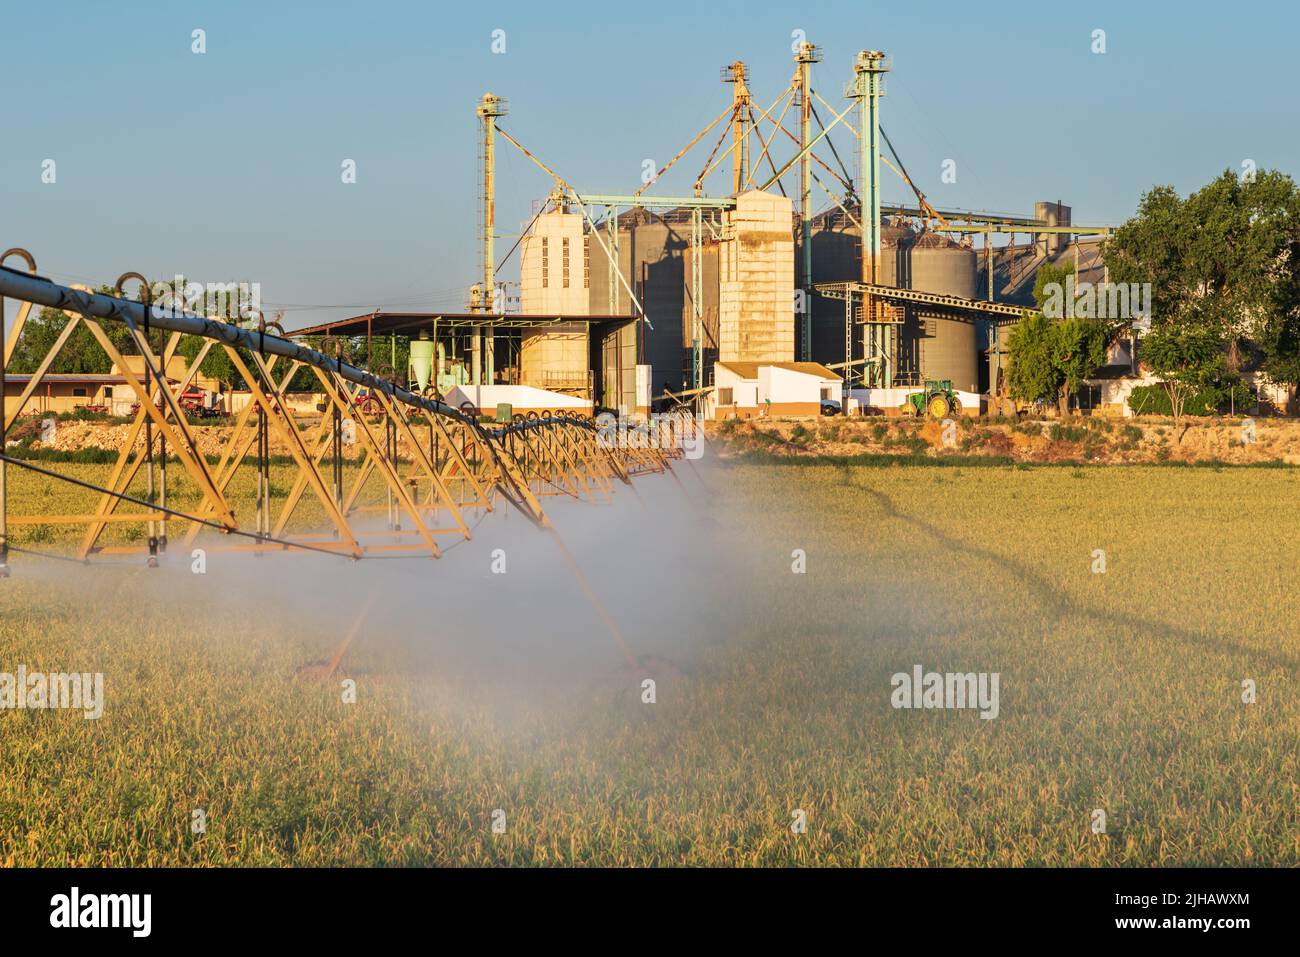 Central pivot irrigation system, irrigation pipes with sprinklers on wheels that rotate on a central axis. Stock Photo